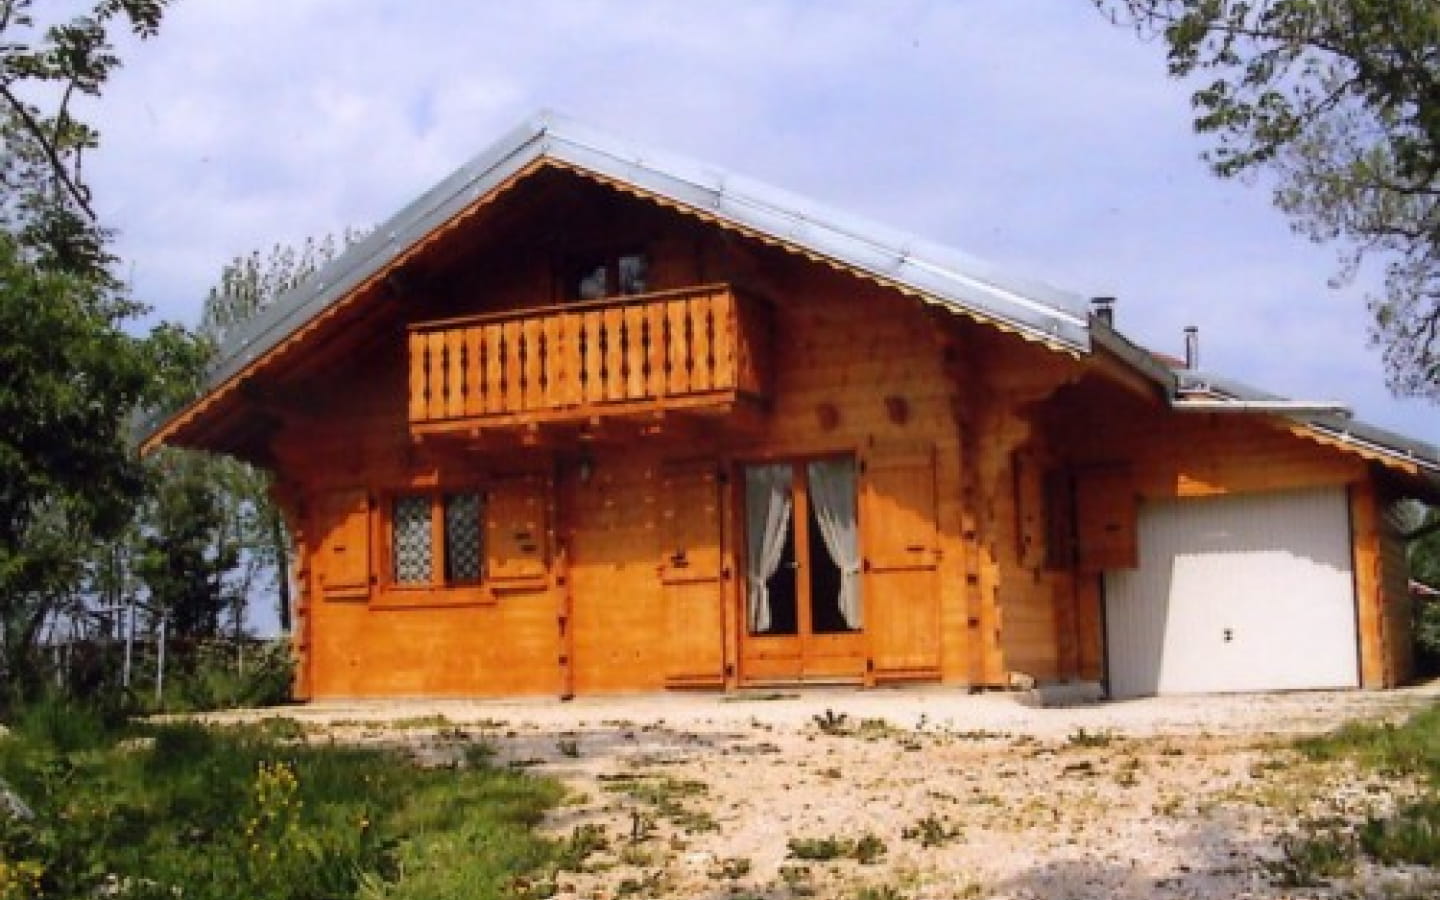 Chalet - Marie-Rose Alpy